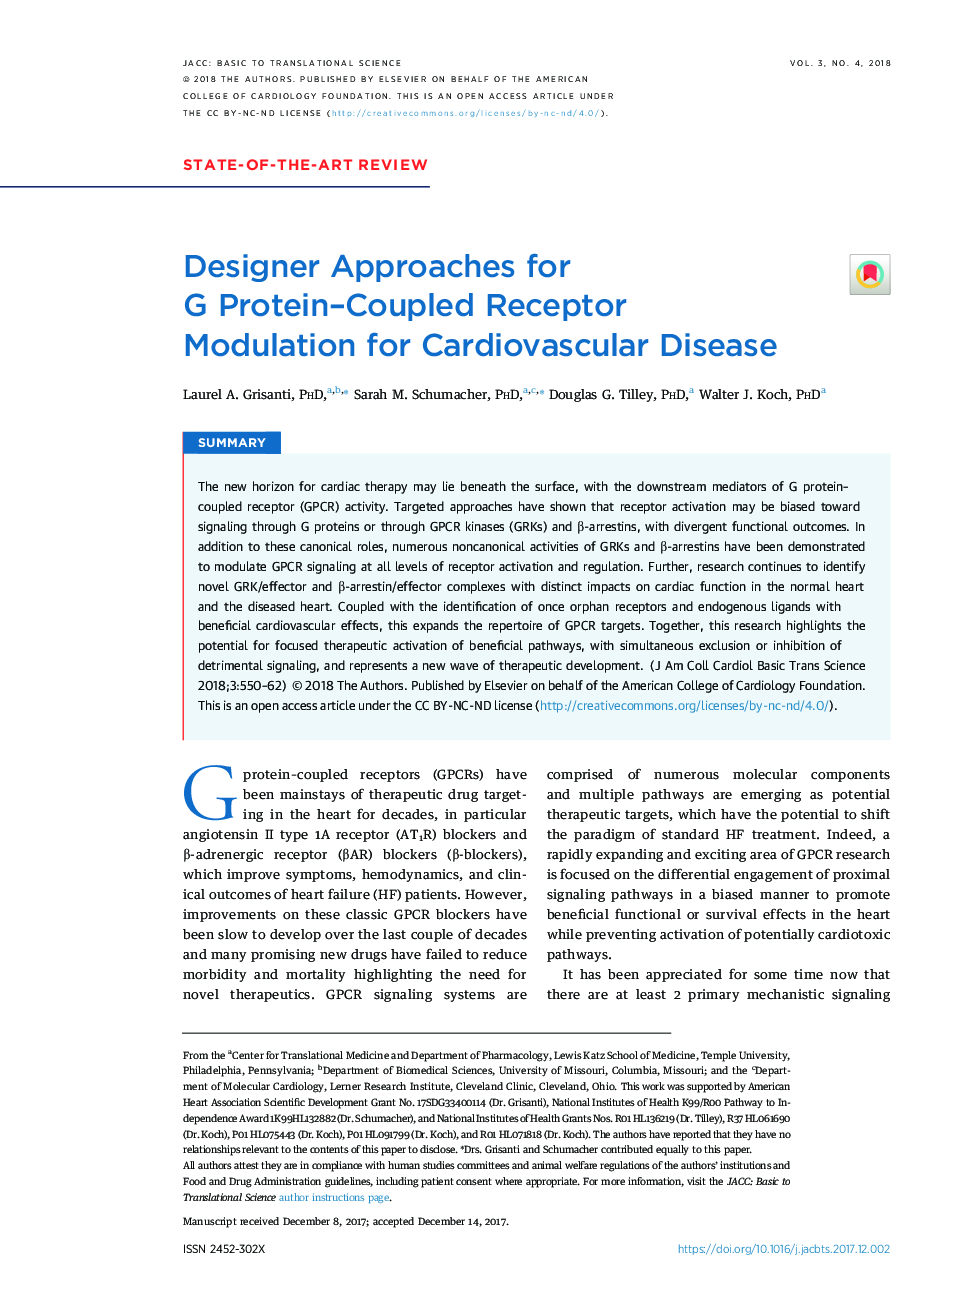 Designer Approaches for G Protein-Coupled Receptor Modulation for Cardiovascular Disease